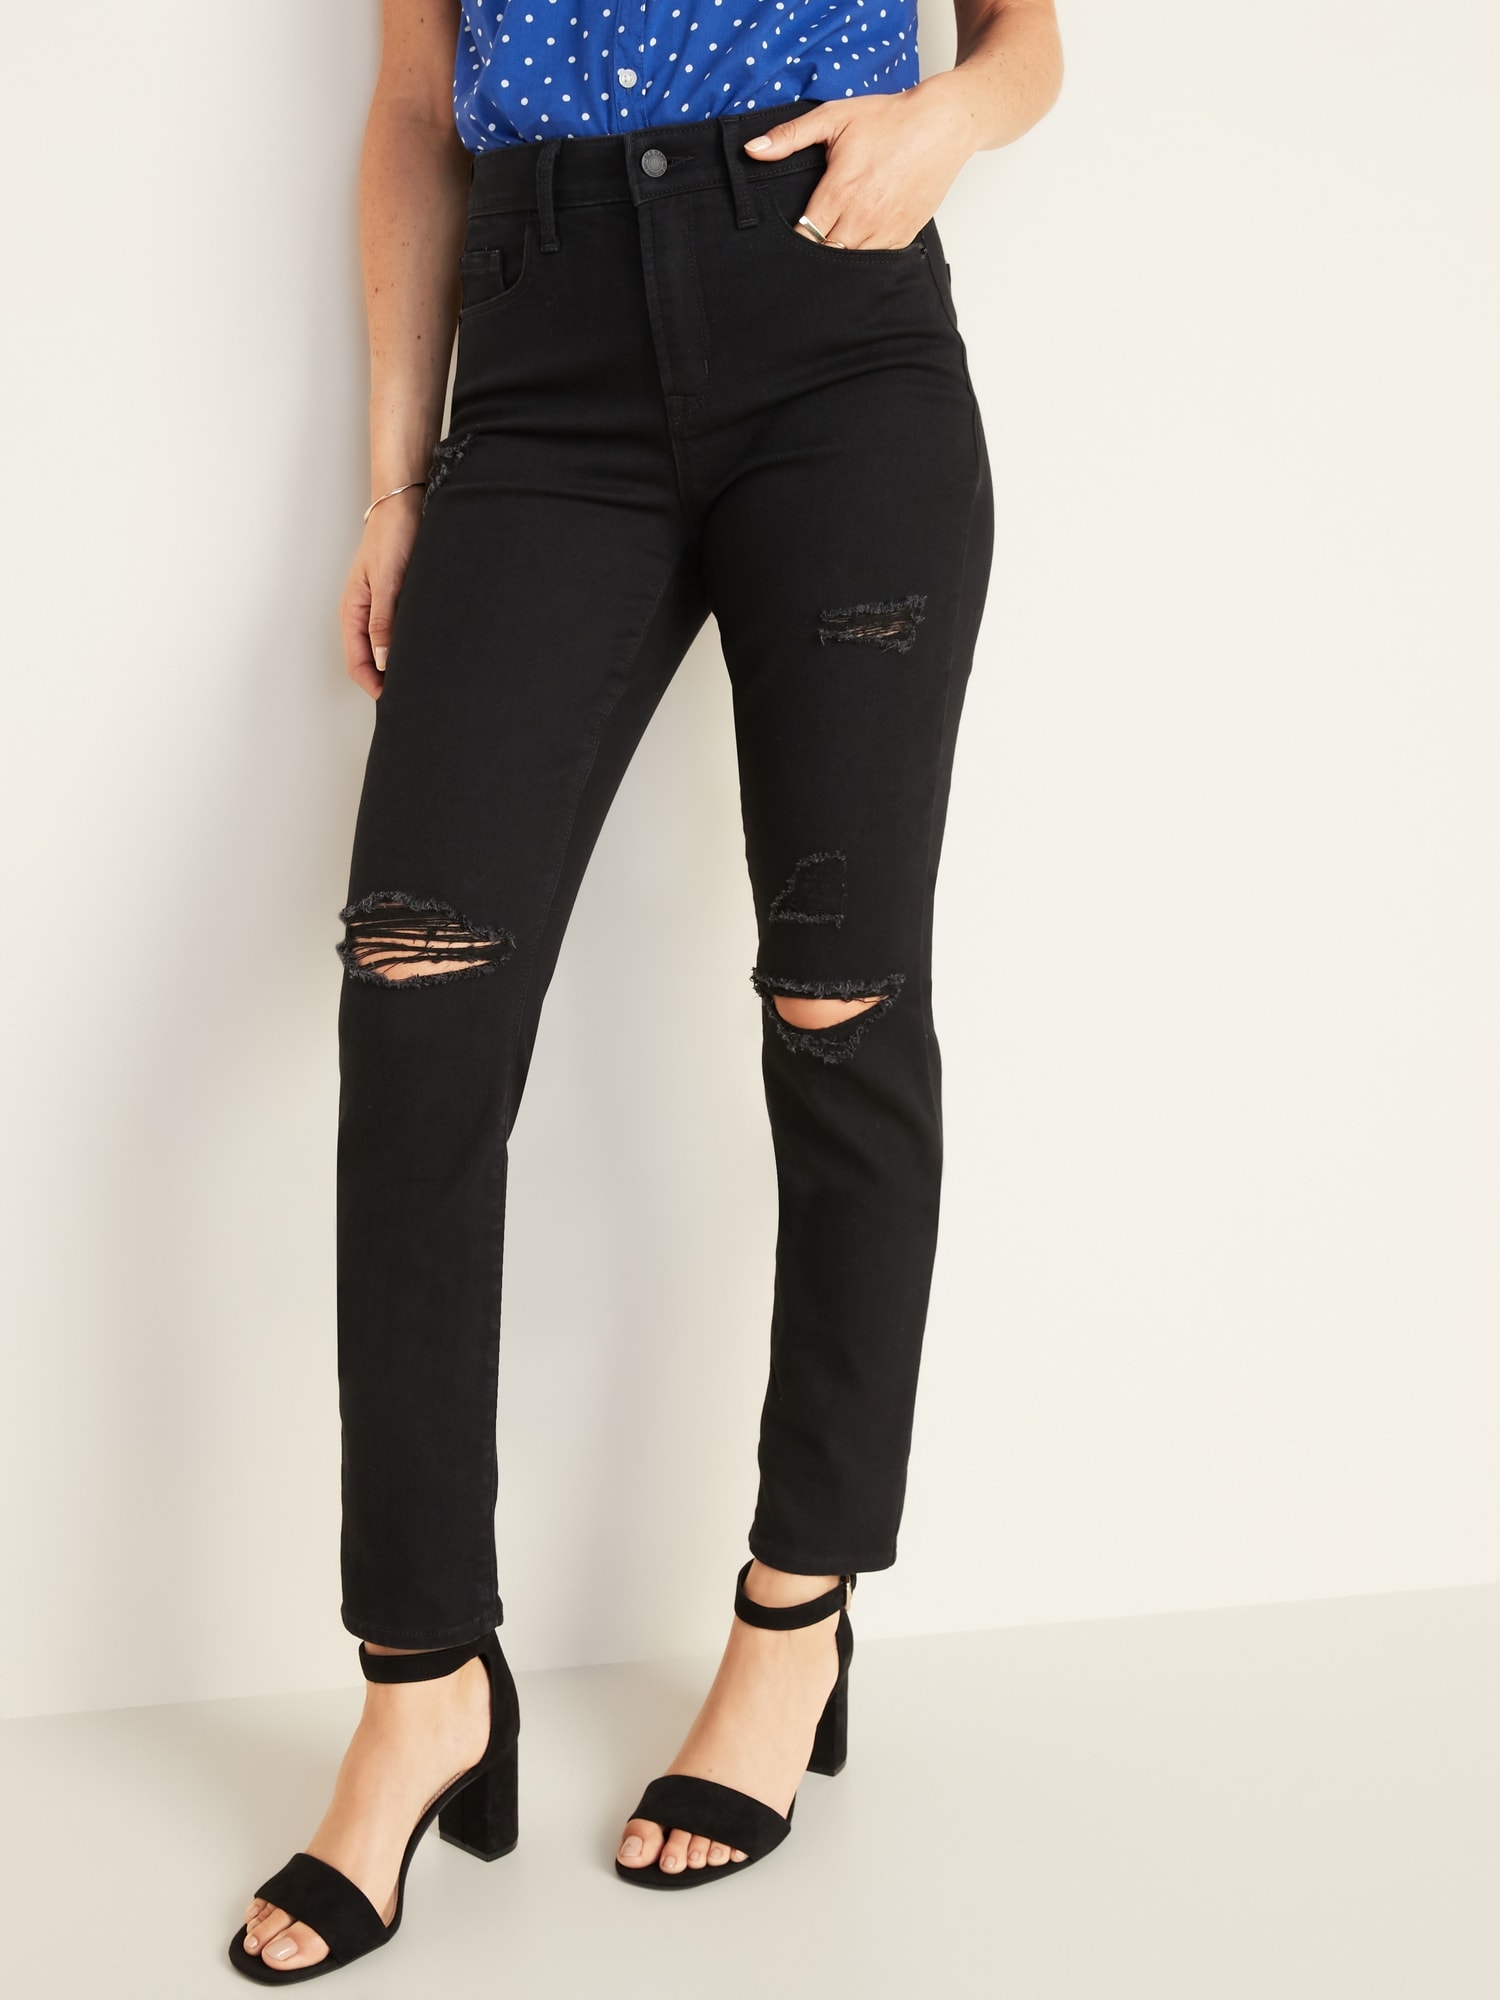 high waisted black ripped jeans womens